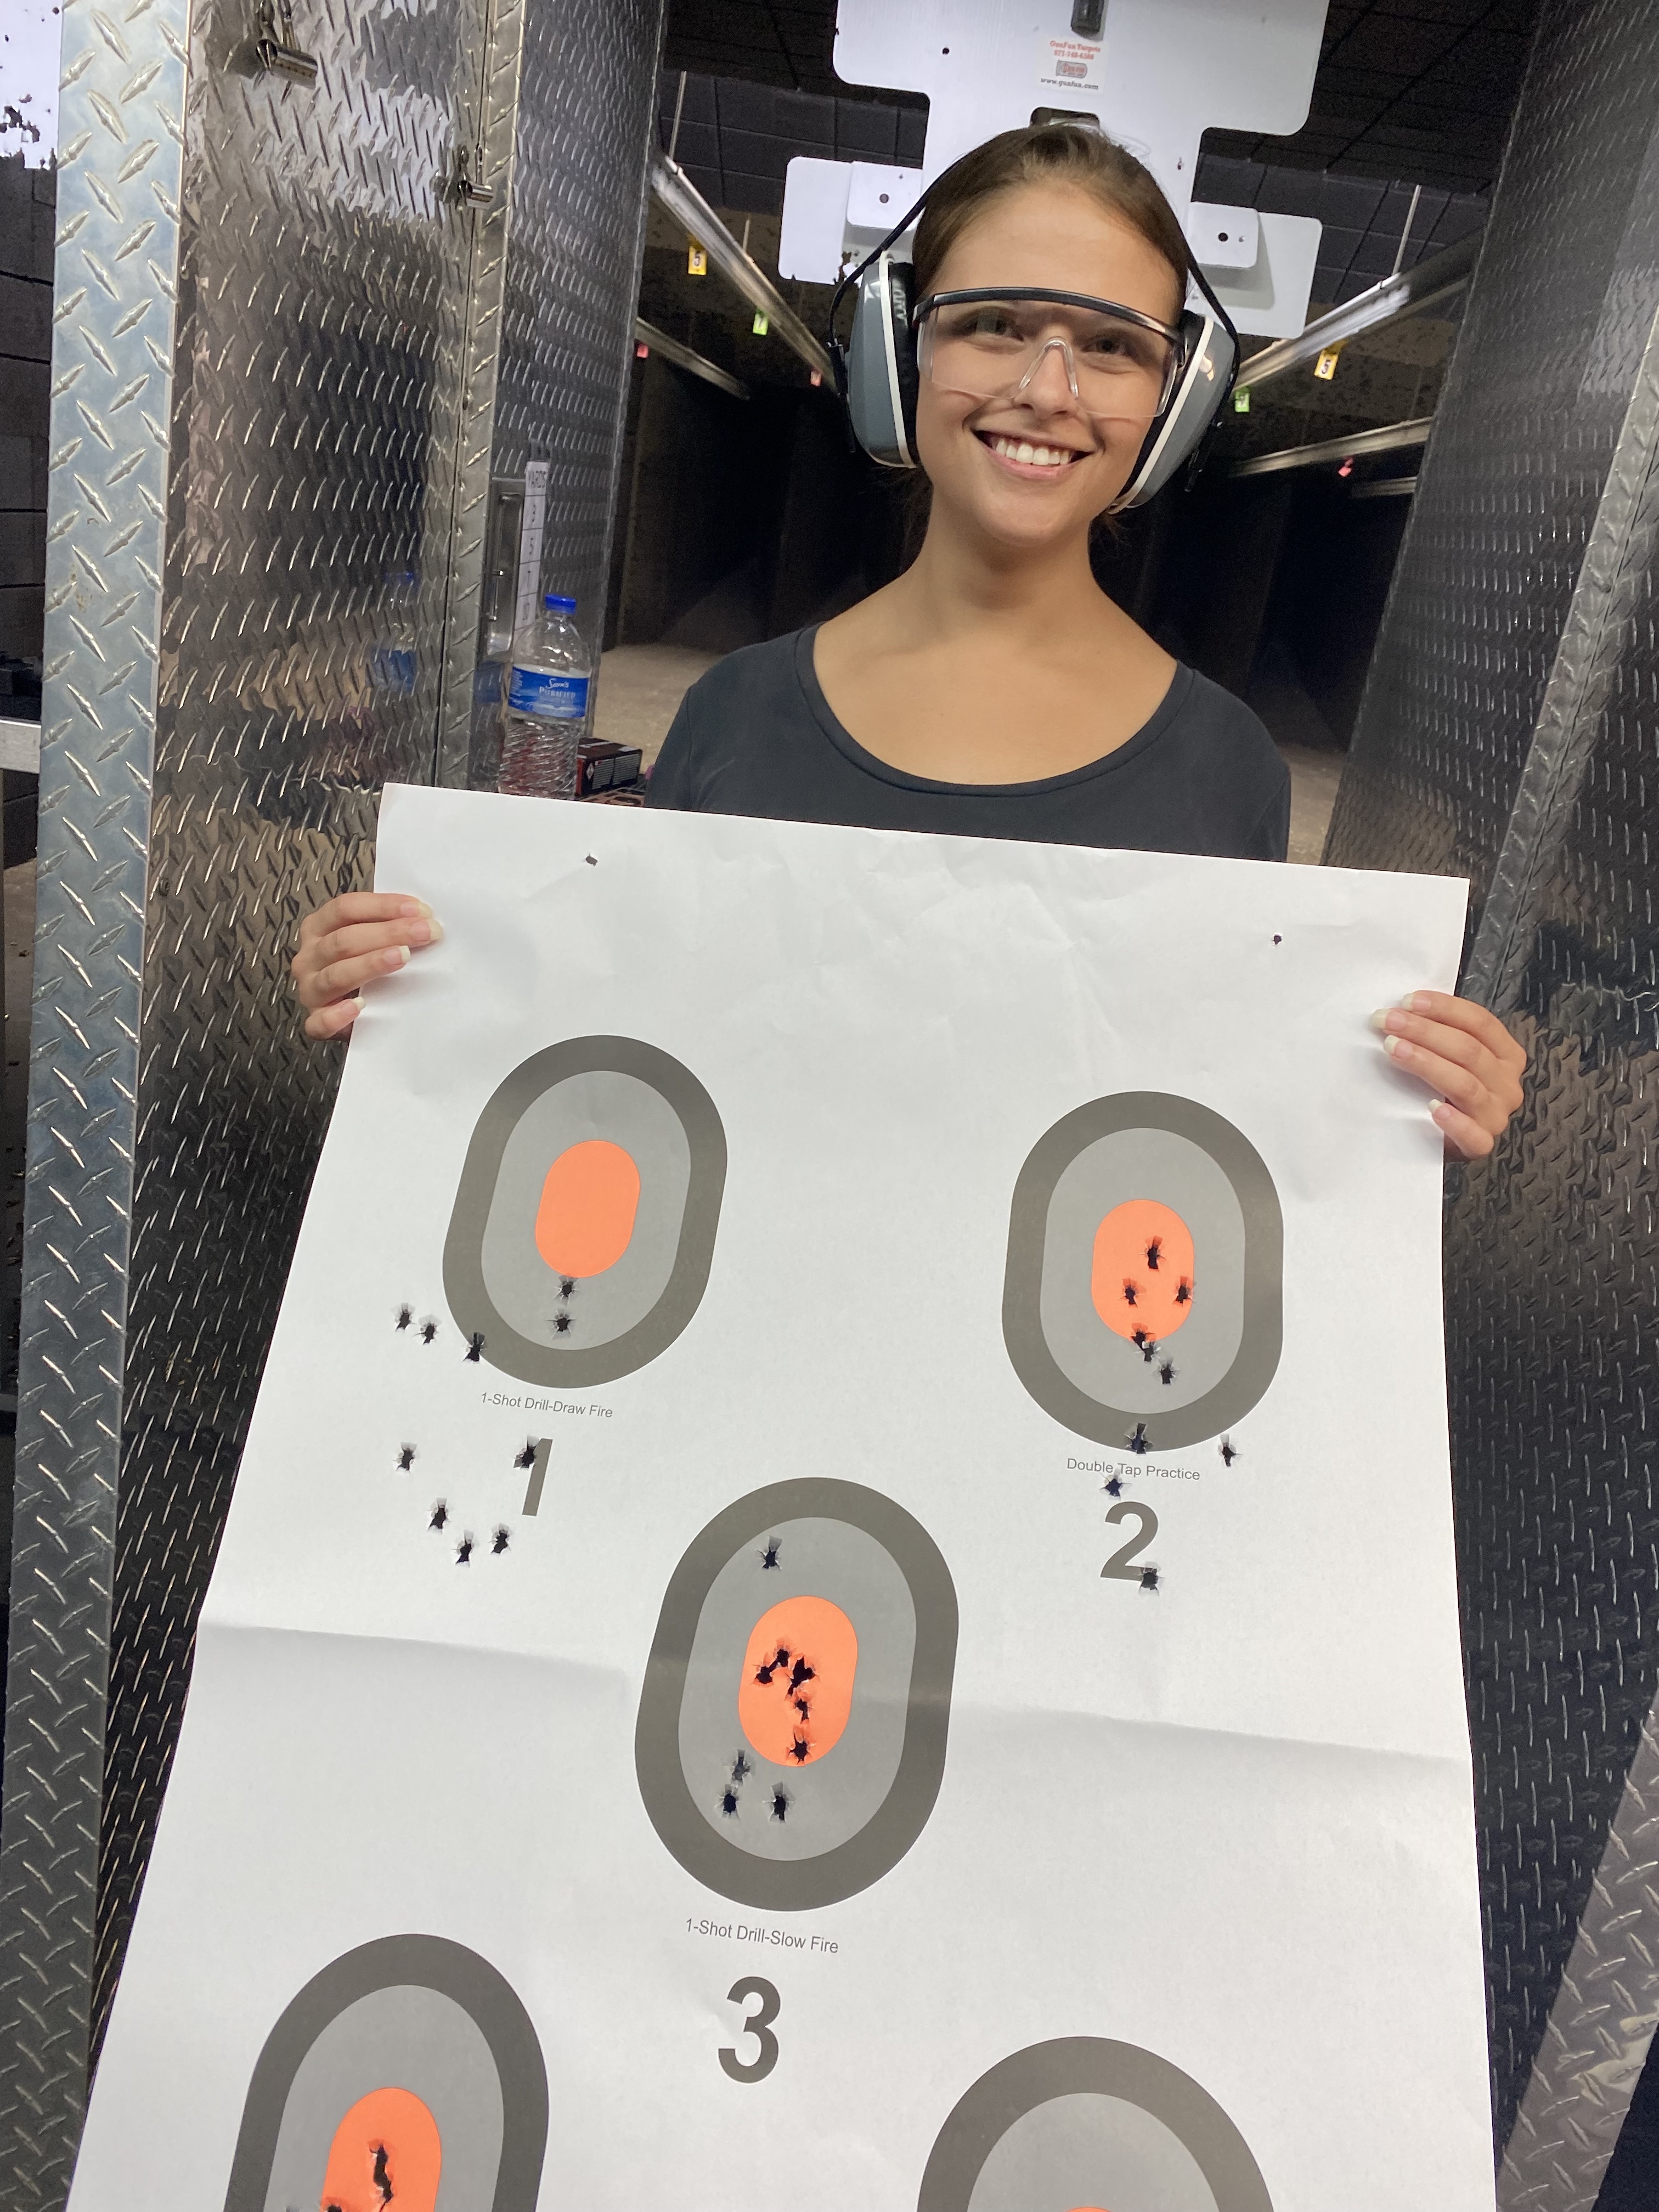 private range training class student holding target